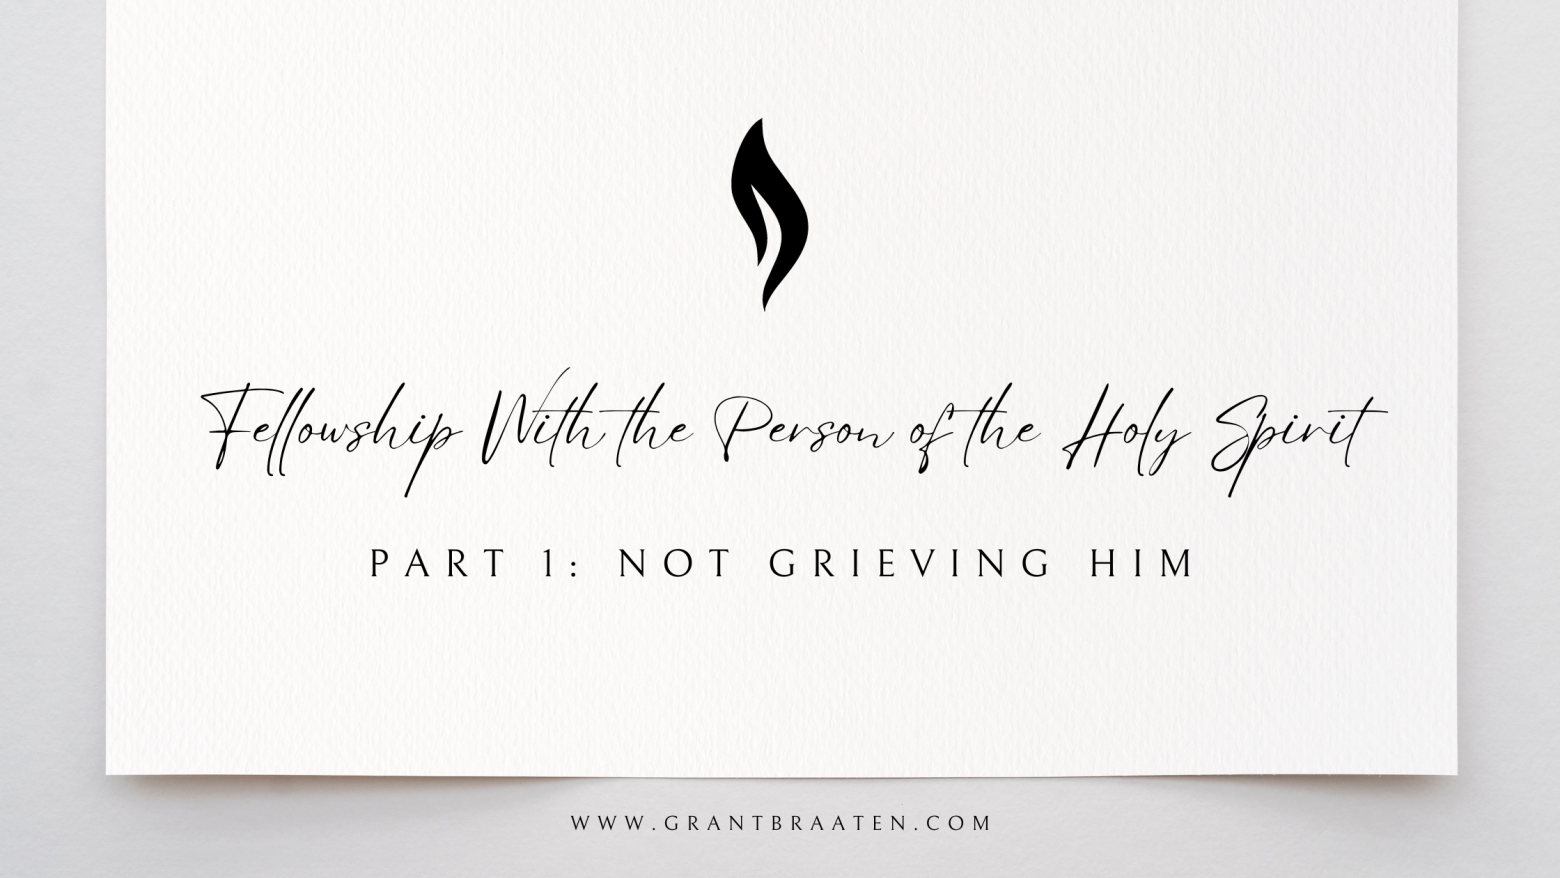 Not Grieving Holy Spirit: Fellowship With The Person of the Holy Spirit – Pt. 1